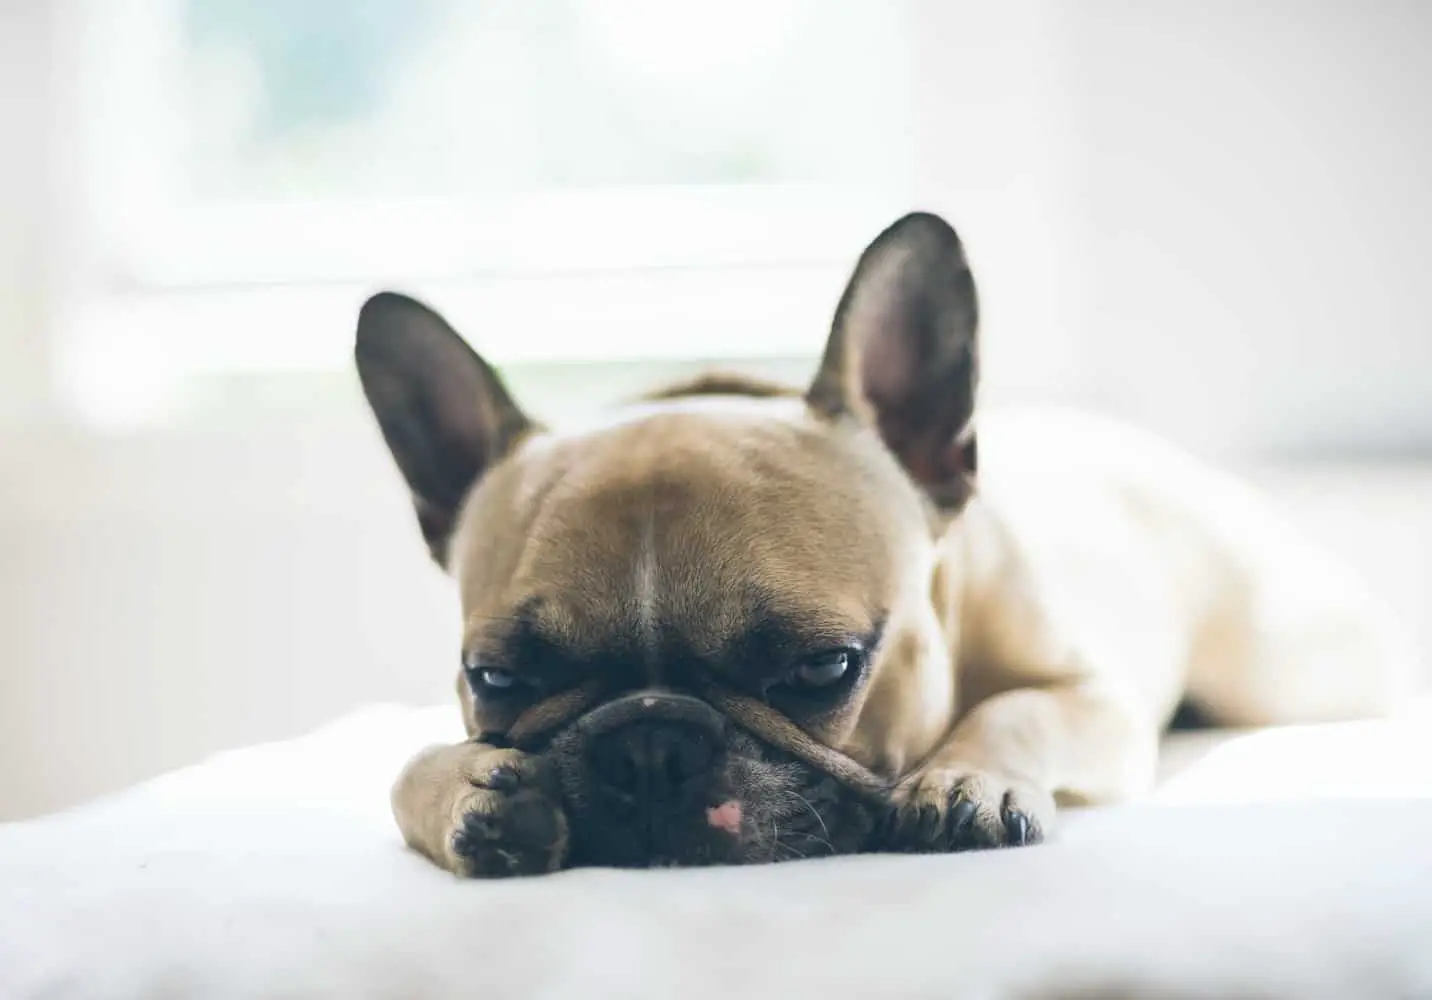 French Bulldog Pros and Cons